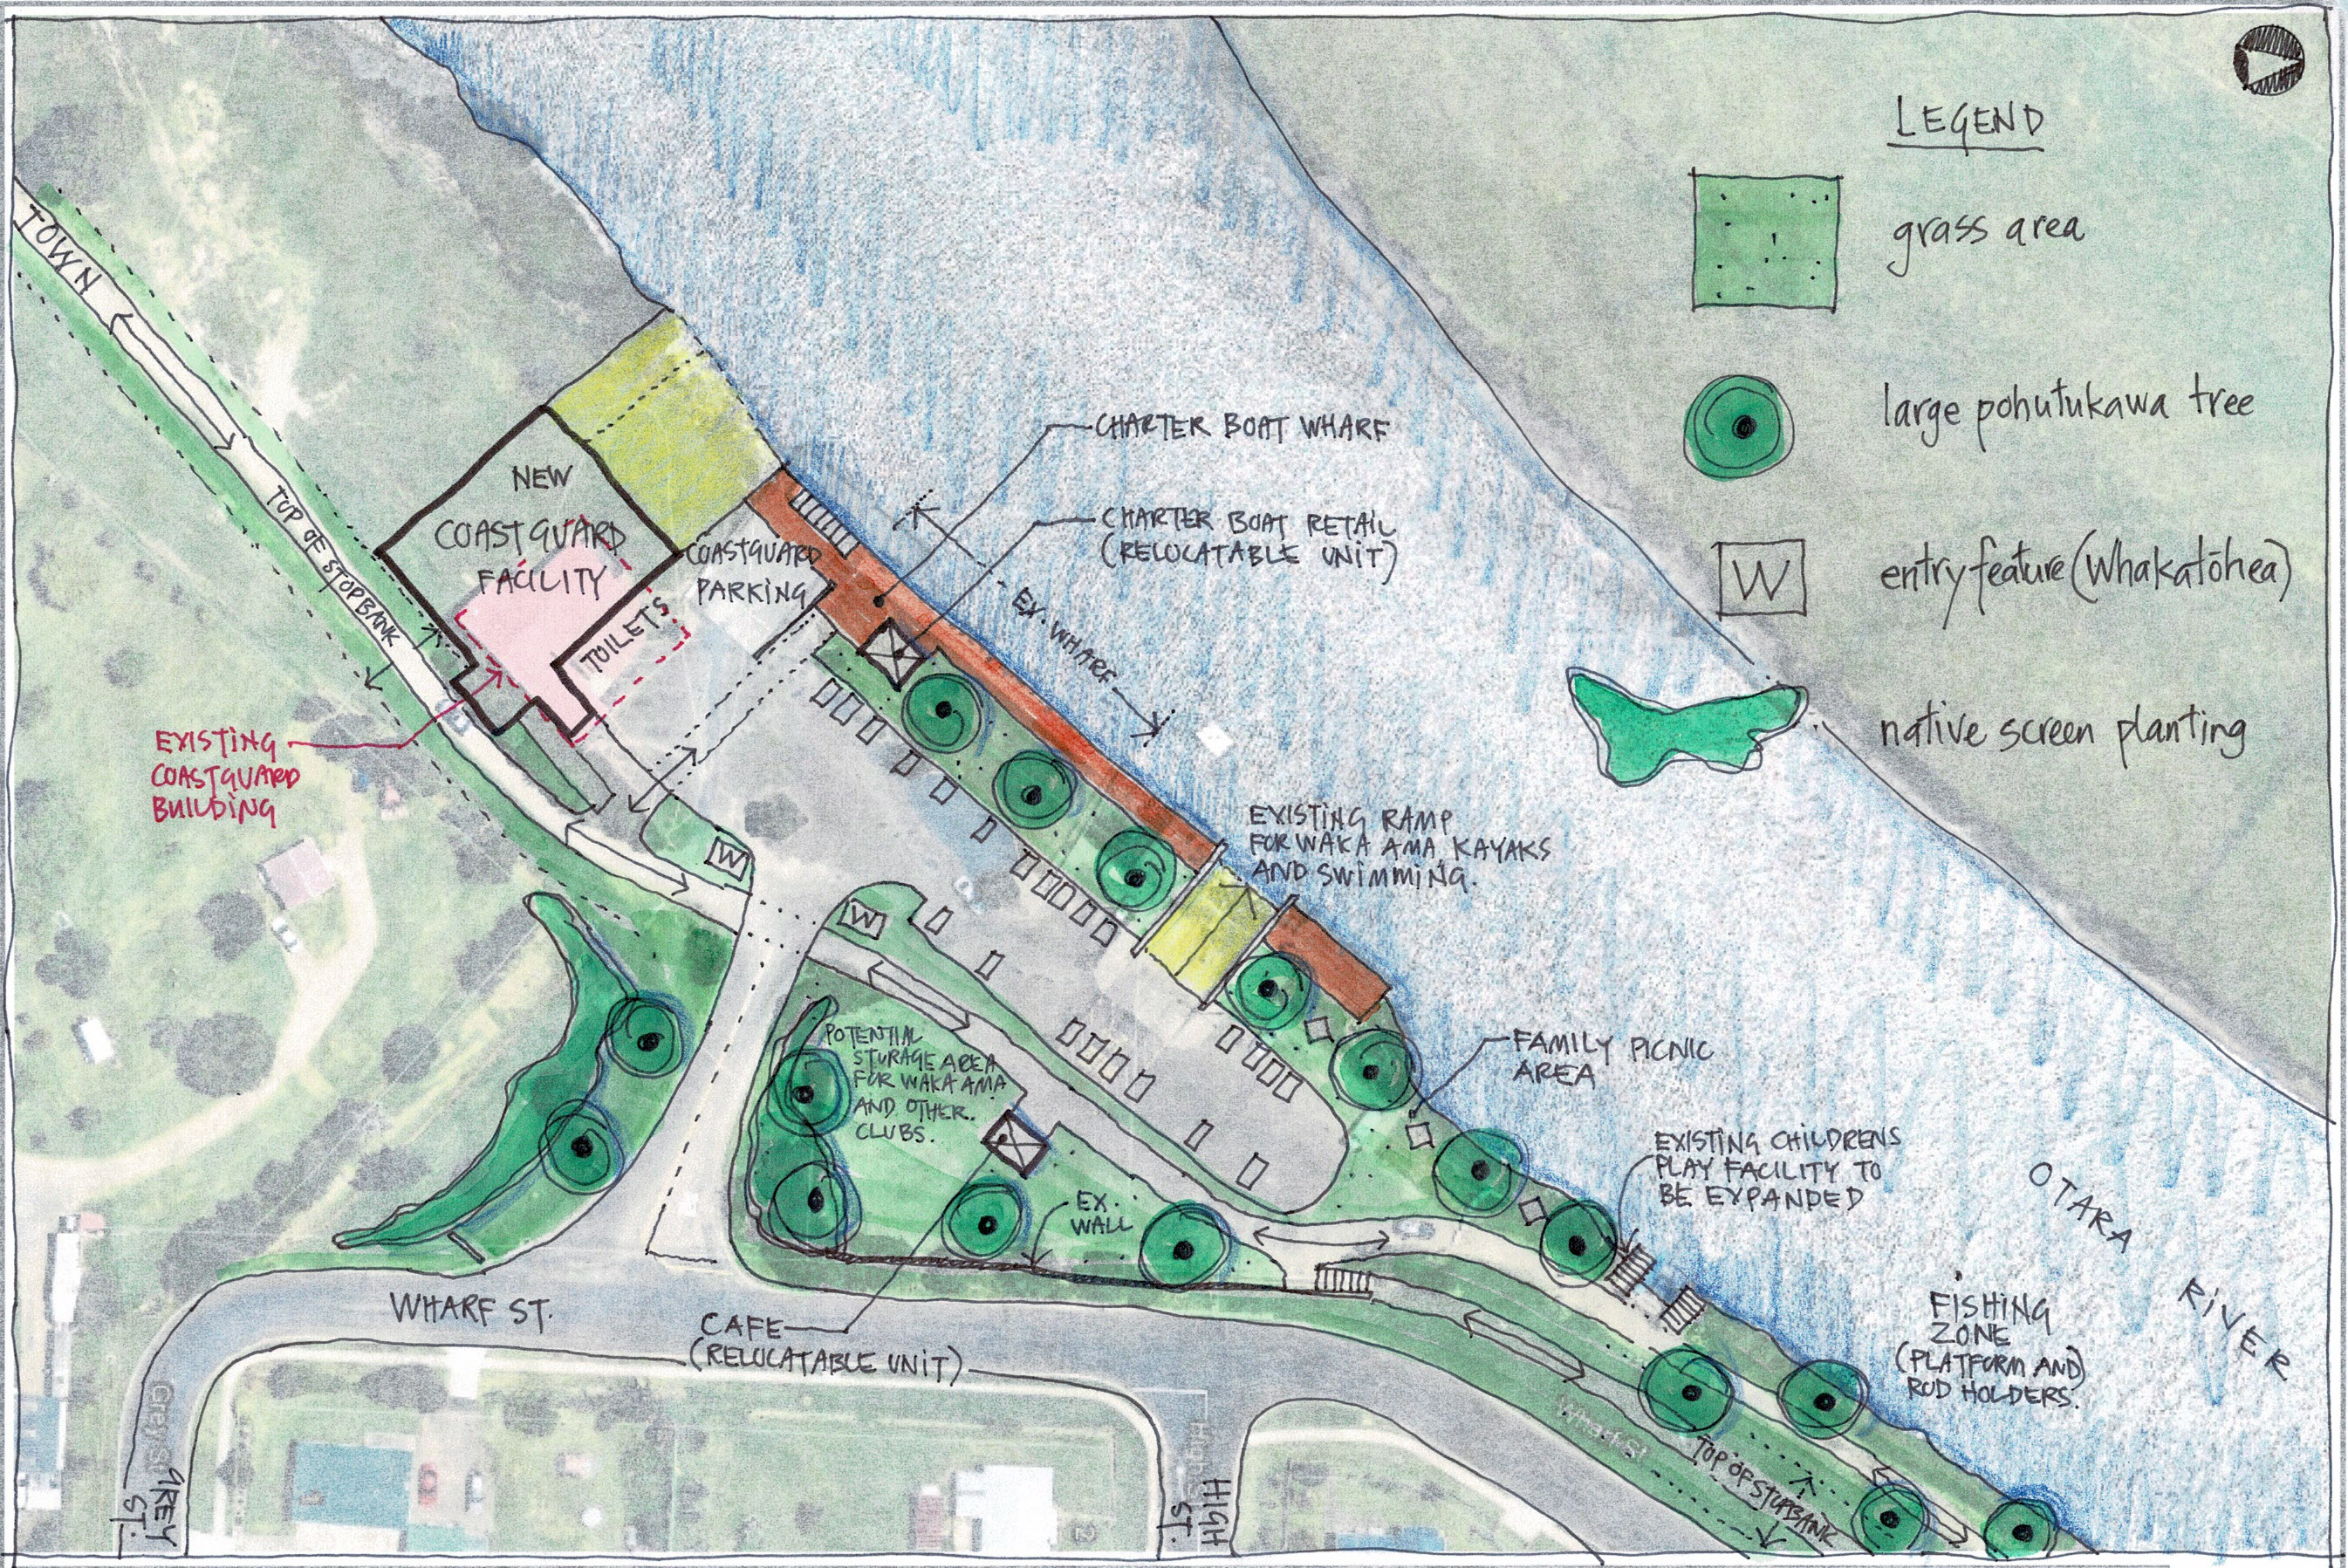 Graphic of Option 2 plans for development of at the existing Opotiki wharf